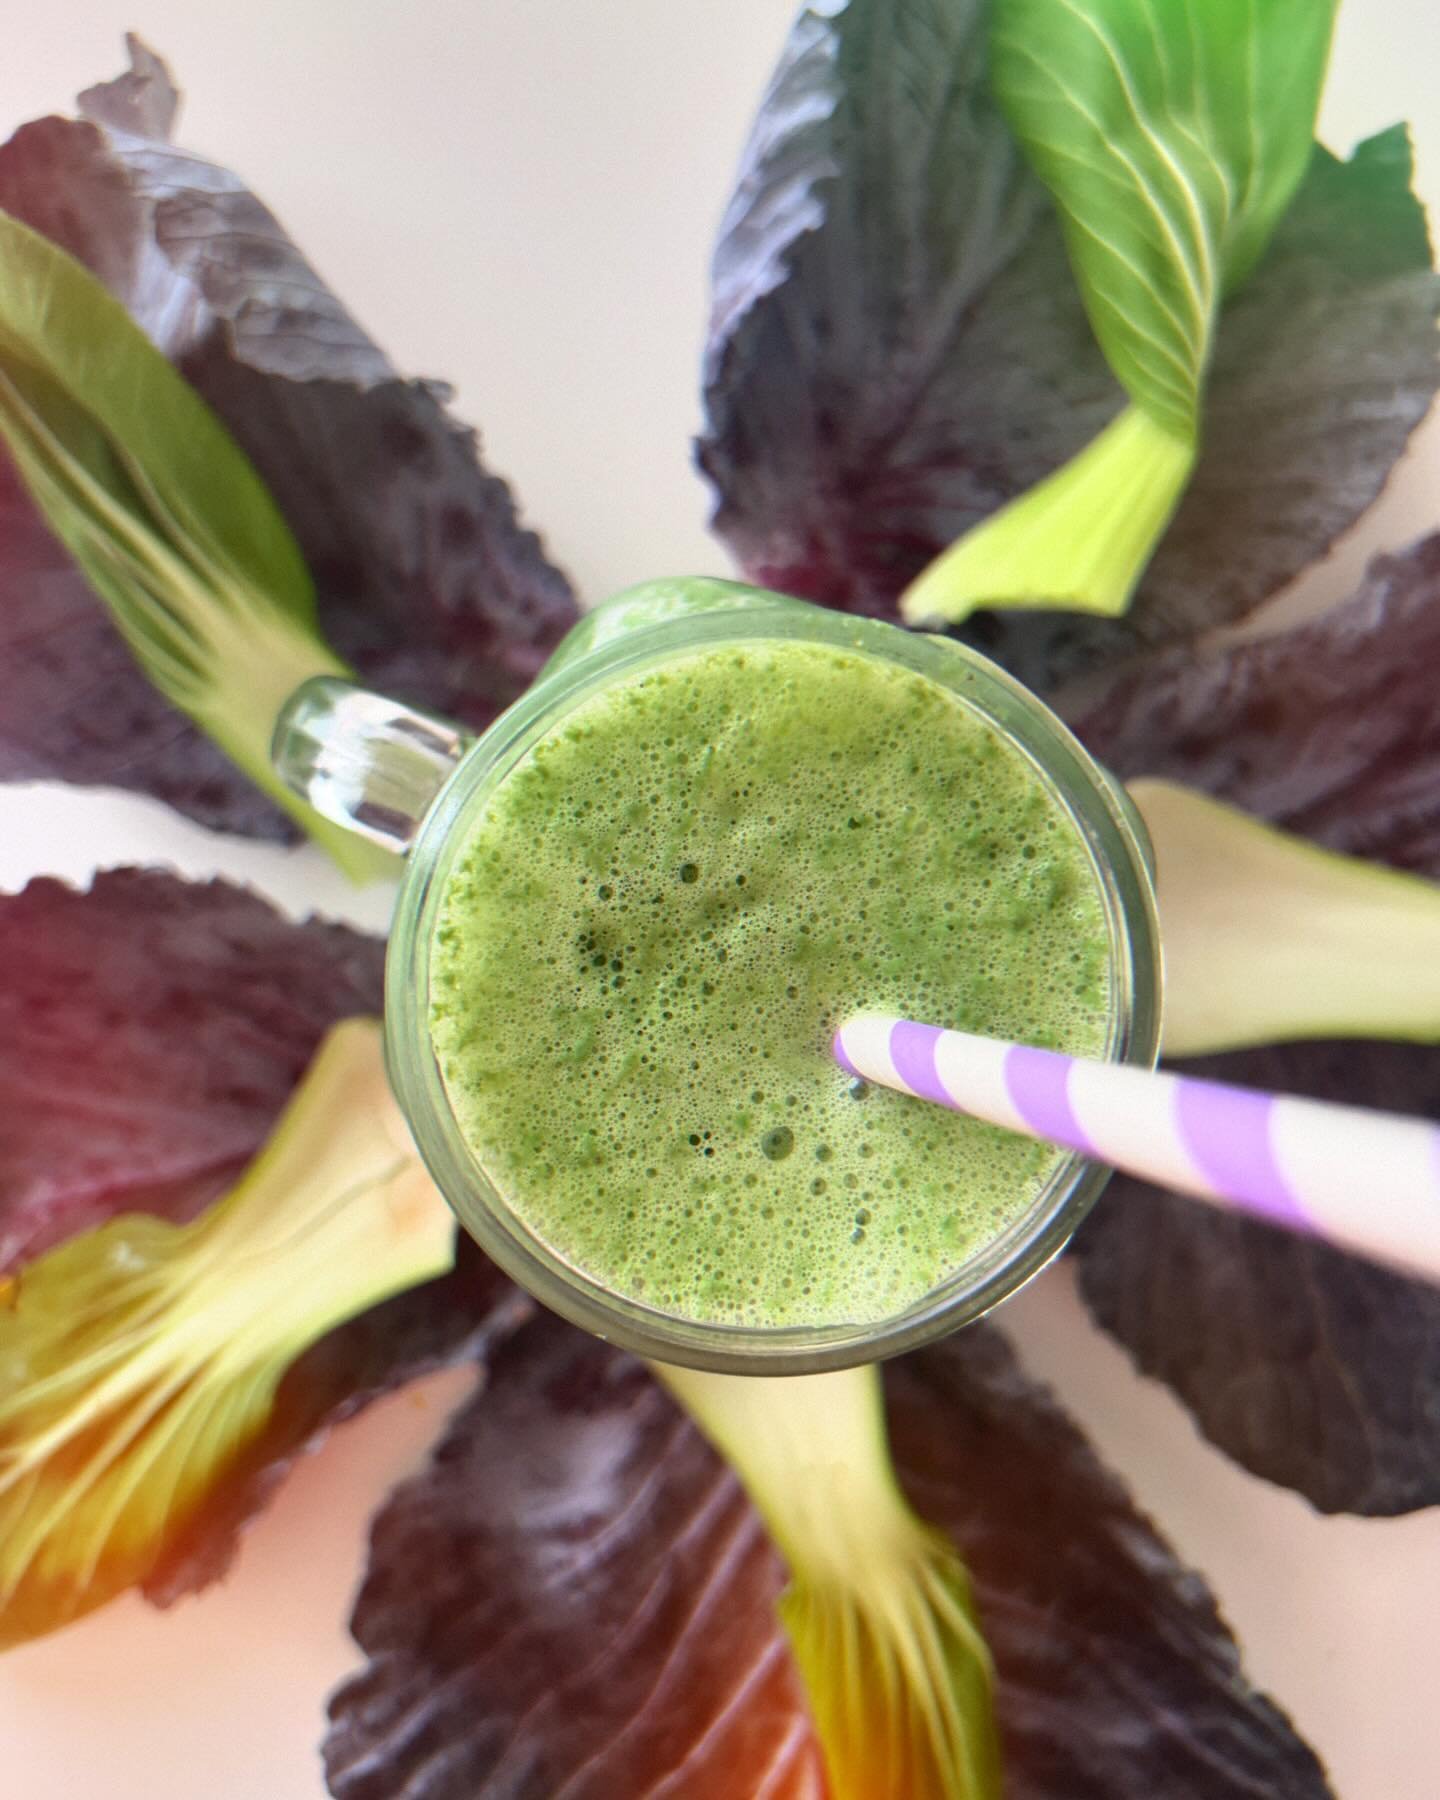 Friday #flowerpower #happyhour and bone-healthy vibes are in the house! 🌸🌼🍃
☀️1 C bok choy
☀️handful fresh parsley 
☀️1 banana
☀️1/2 mango
☀️1 tbsp chia seeds
☀️1 tbsp #hemp seeds
☀️1/2 tbsp tahini
☀️juice of half a lemon
☀️1 C filtered water
Blen